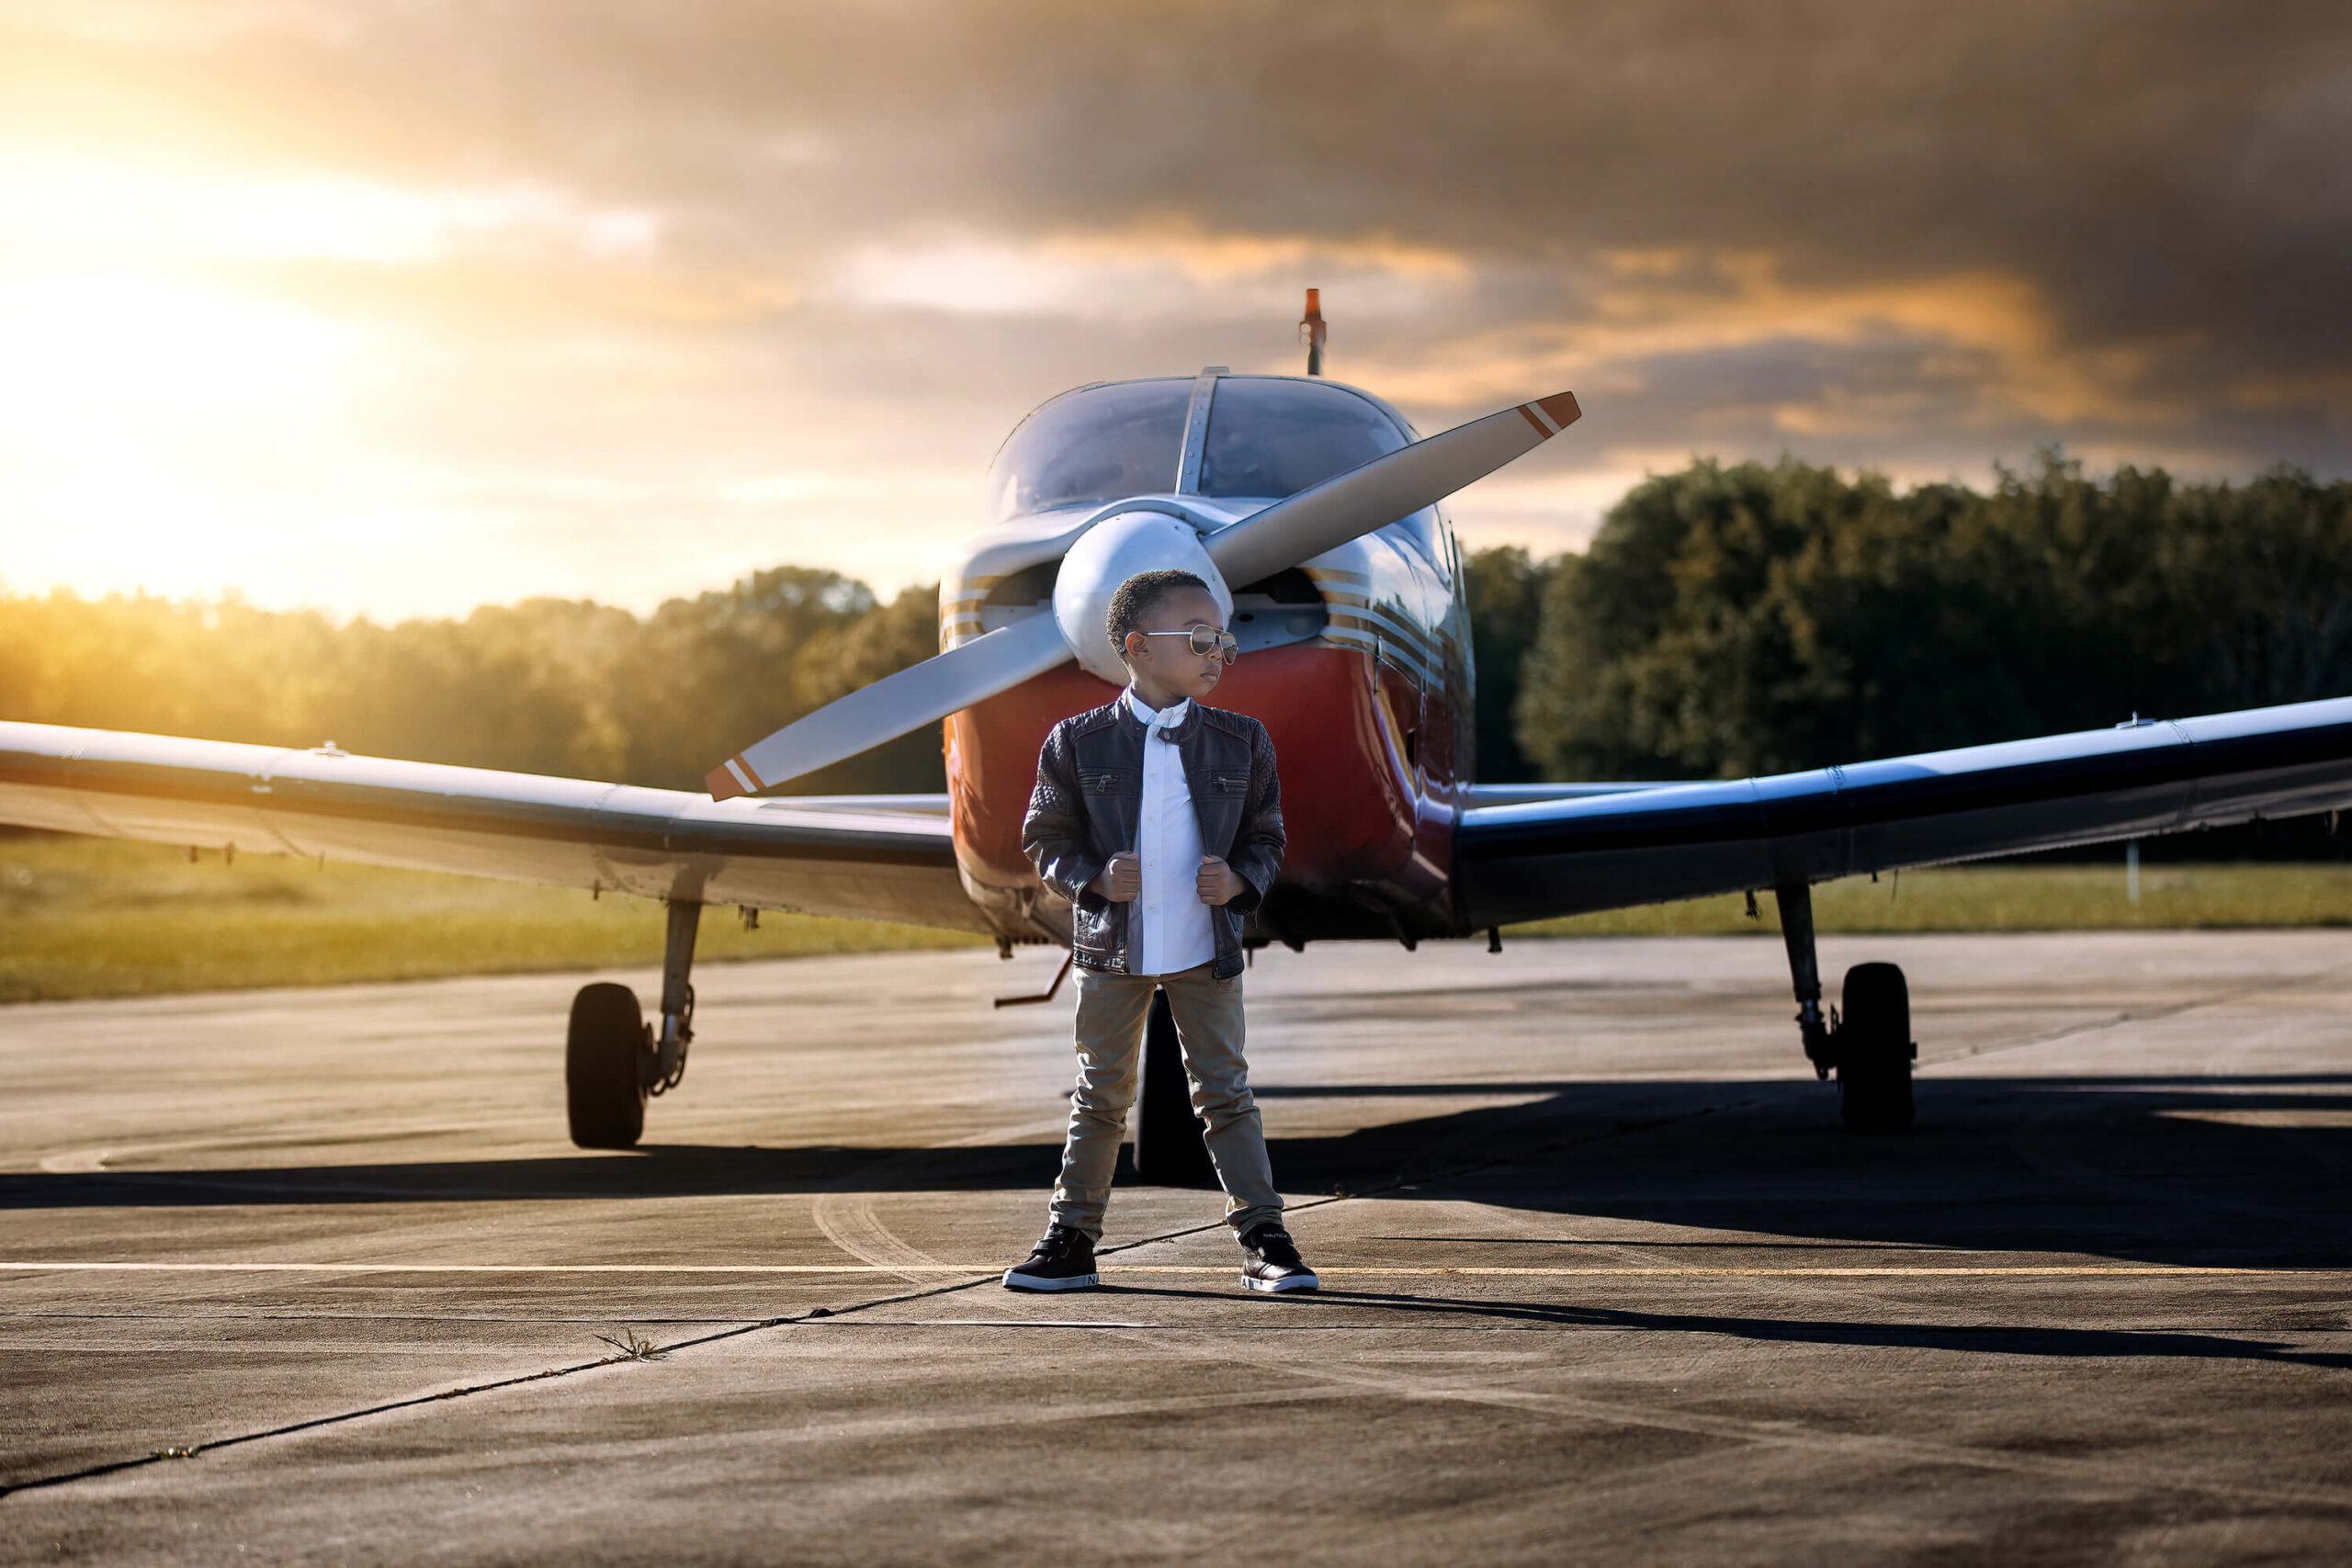 Adorable boy dressed in a leather ujacket wearing aviator sunglasses posing in front of an airplane